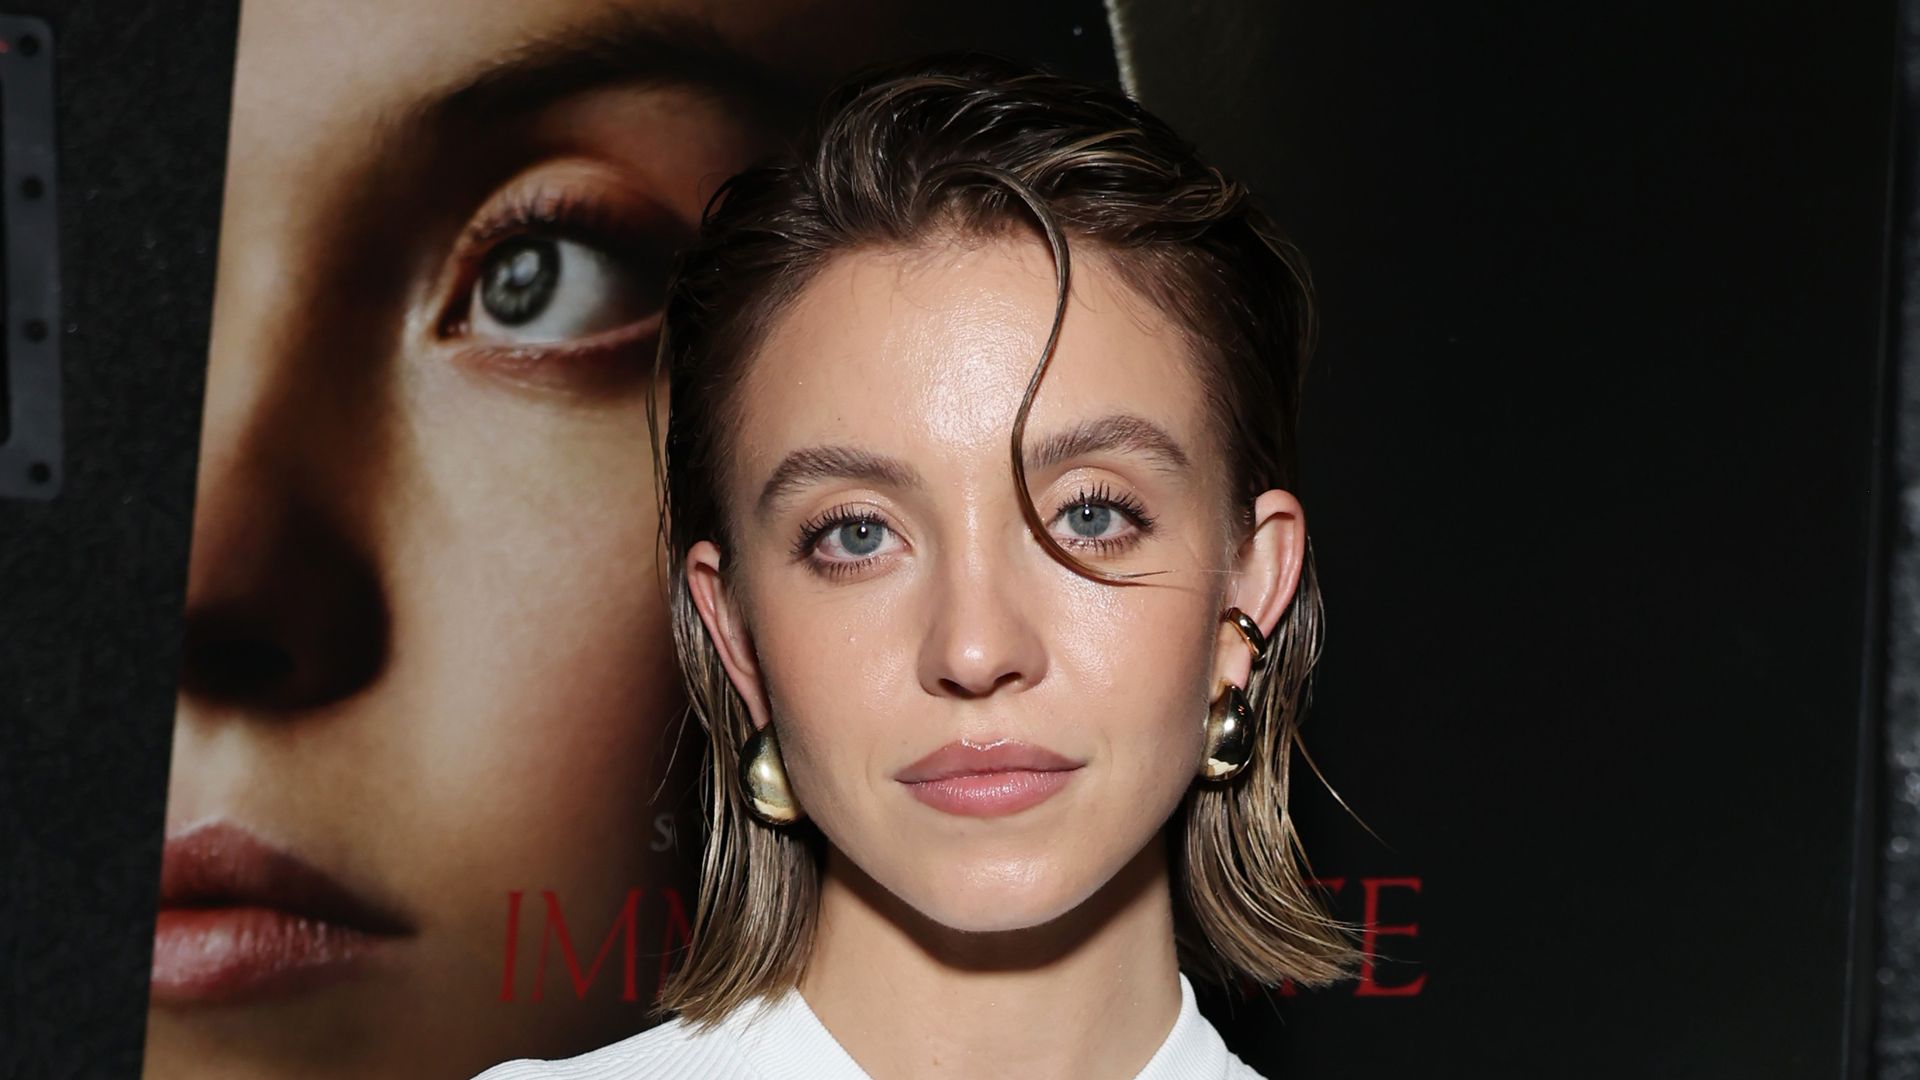 Sydney Sweeney’s sultry wet-look hair was the real star of the Immaculate premiere thumbnail